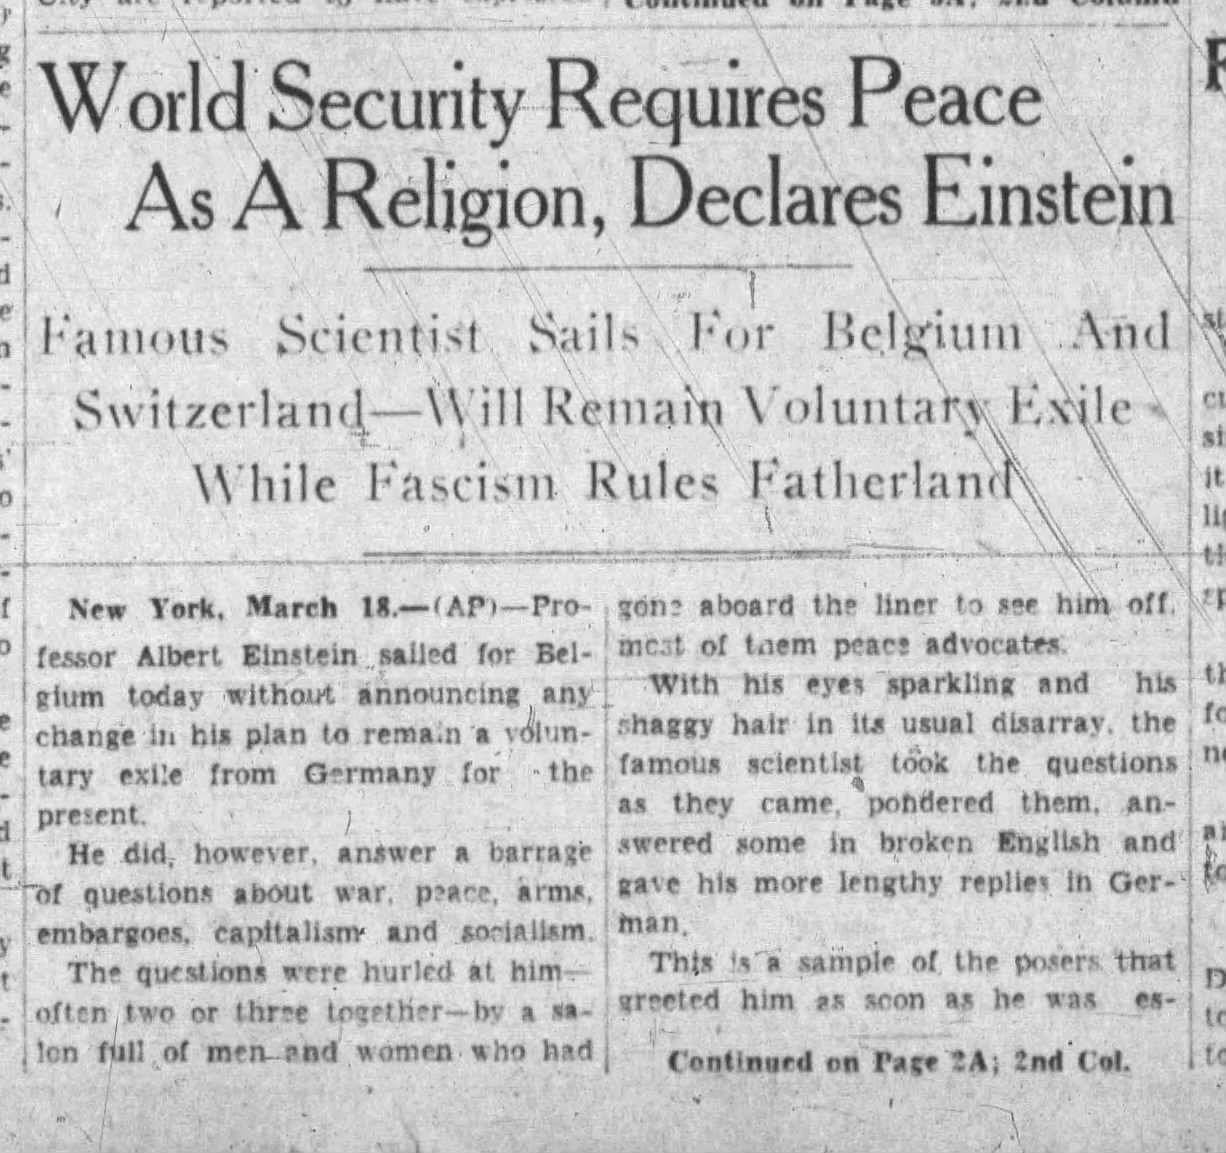 World Security Requires Peace As A Religion, Declares Einstein